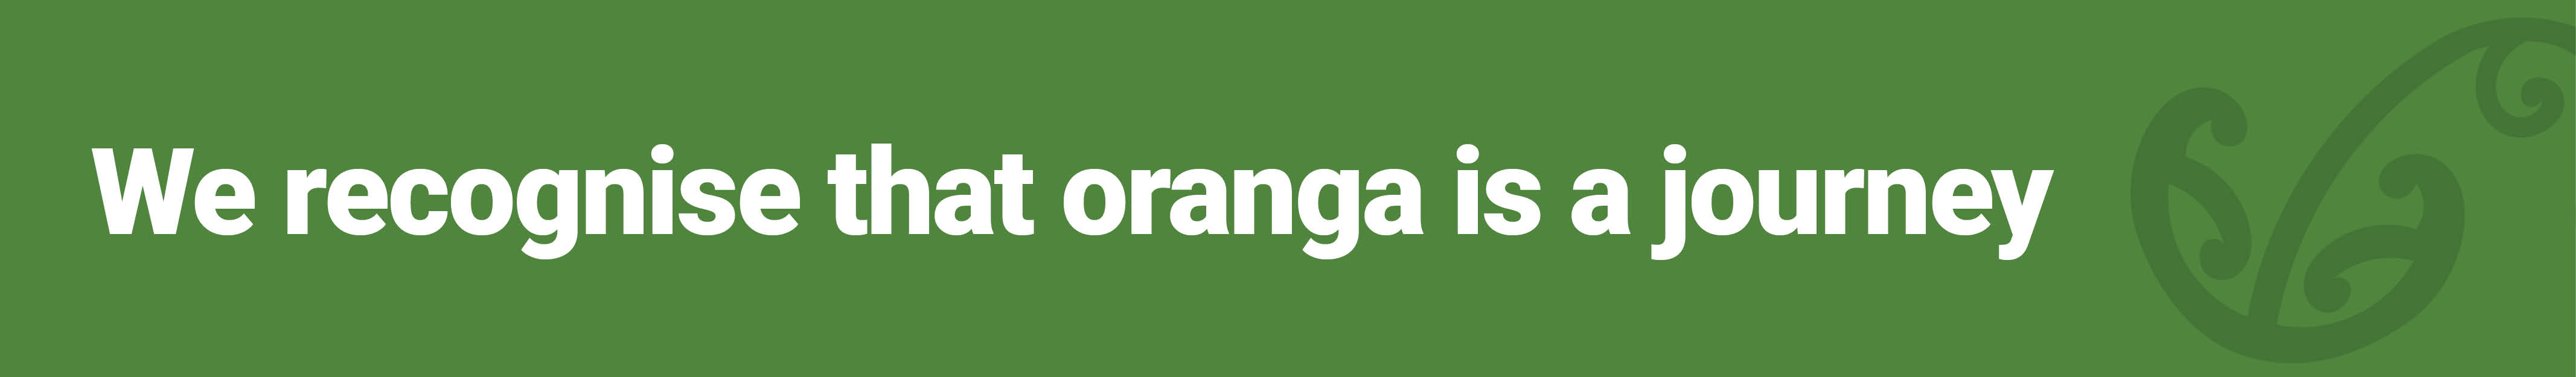 We recognise that oranga is a journey